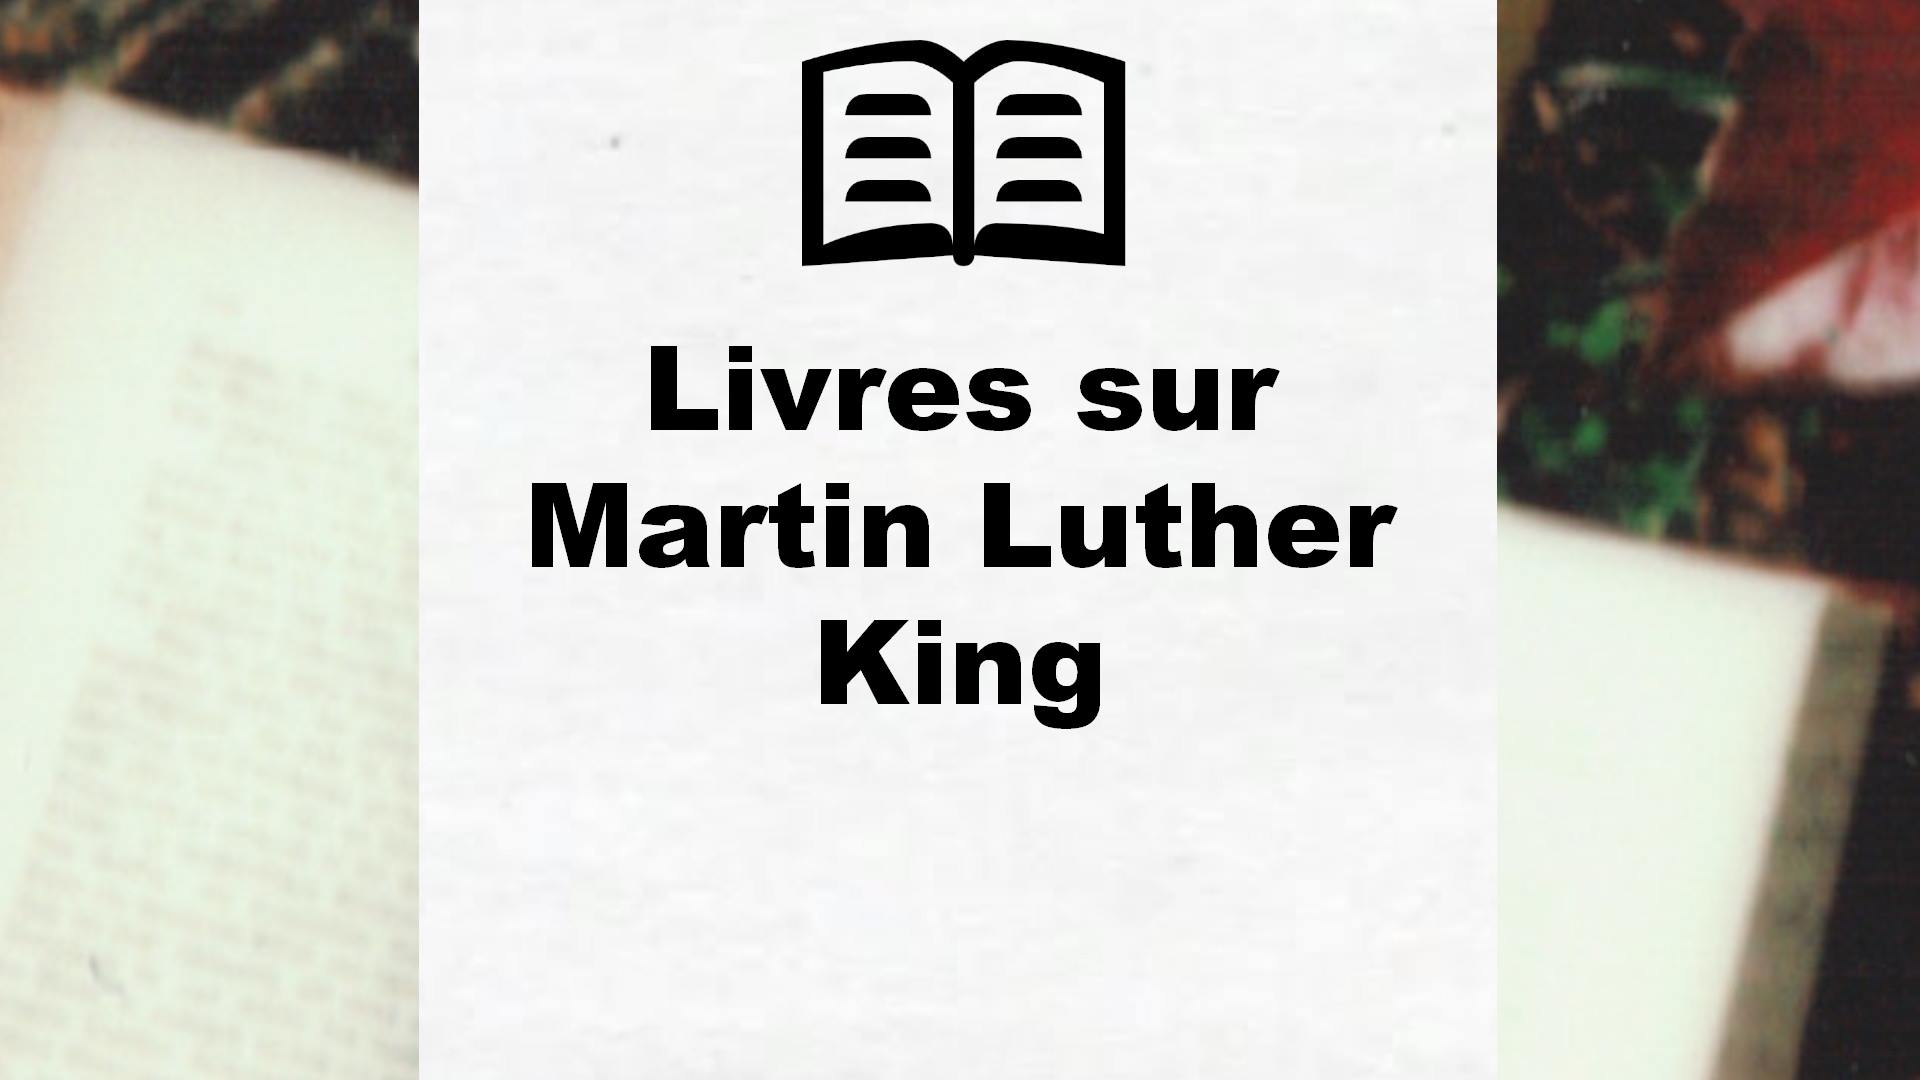 Livres sur Martin Luther King